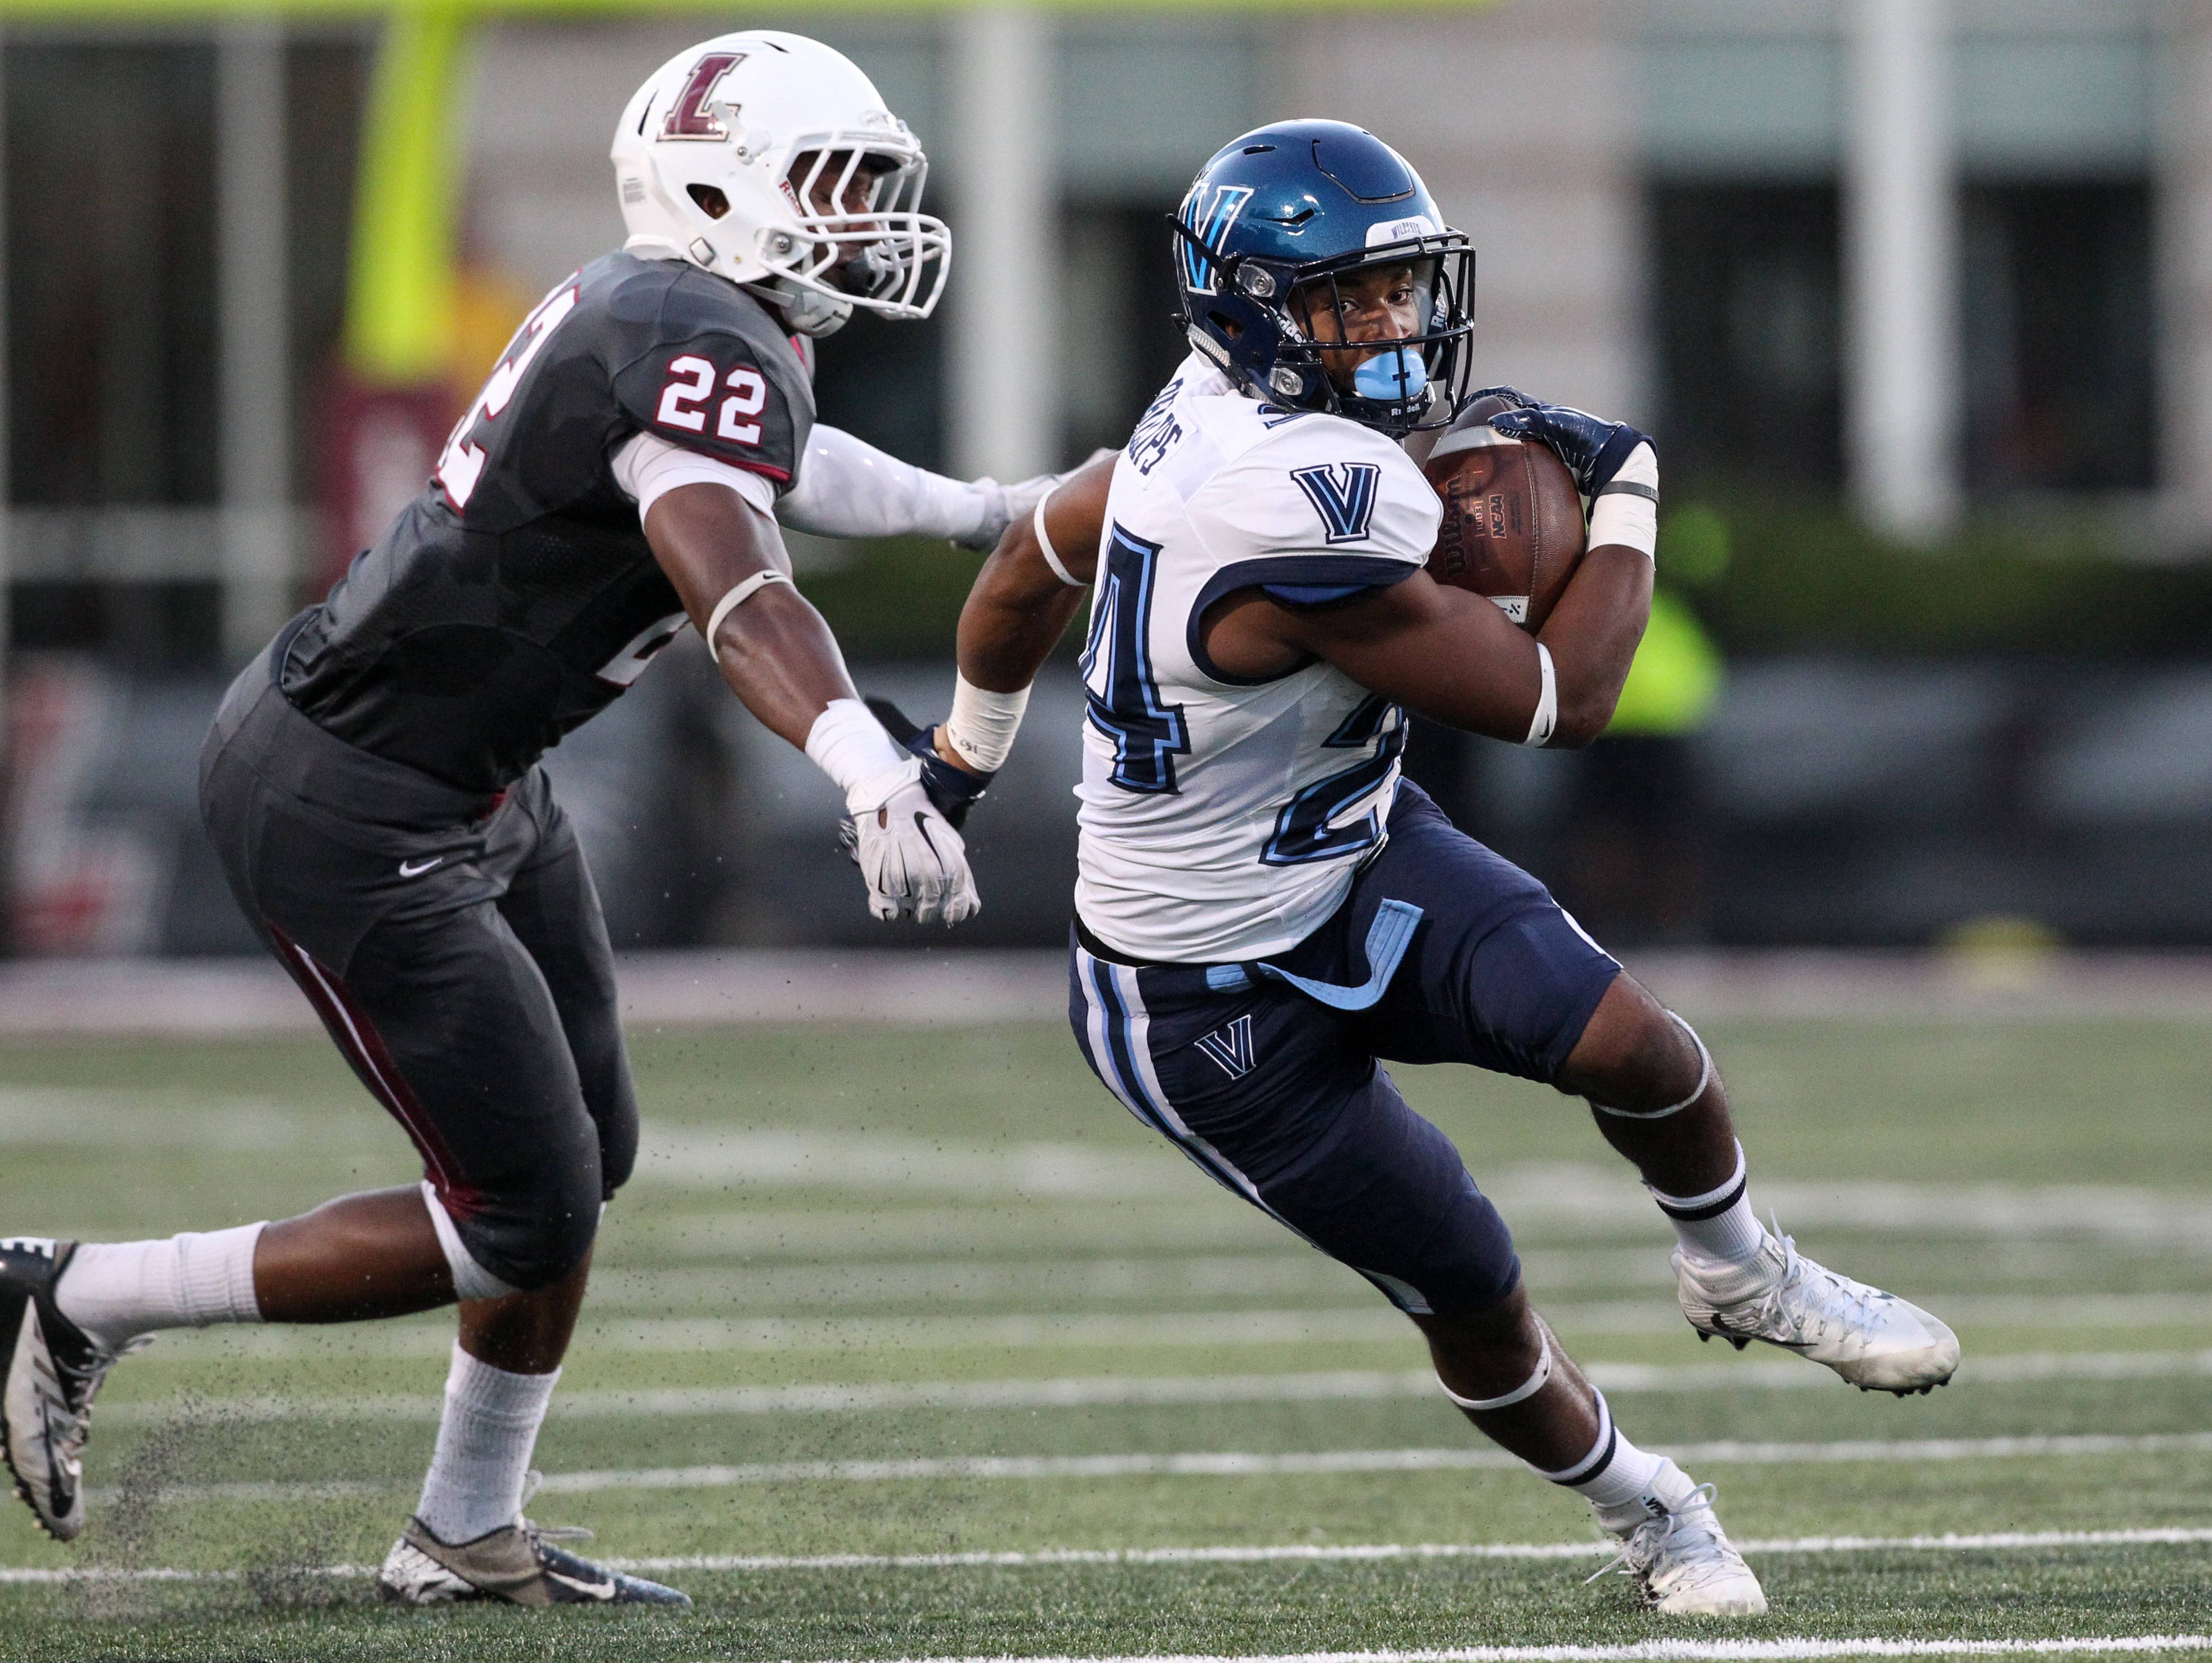 Villanova Wildcats wide receiver Taurus Phillips, a Beacon High School graduate, runs with the ball during the second quarter against the Lafayette Leopards at Fisher Field in Easton, Pennsylvania on Sept. 24. Villanova defeated Lafayette 31-14.